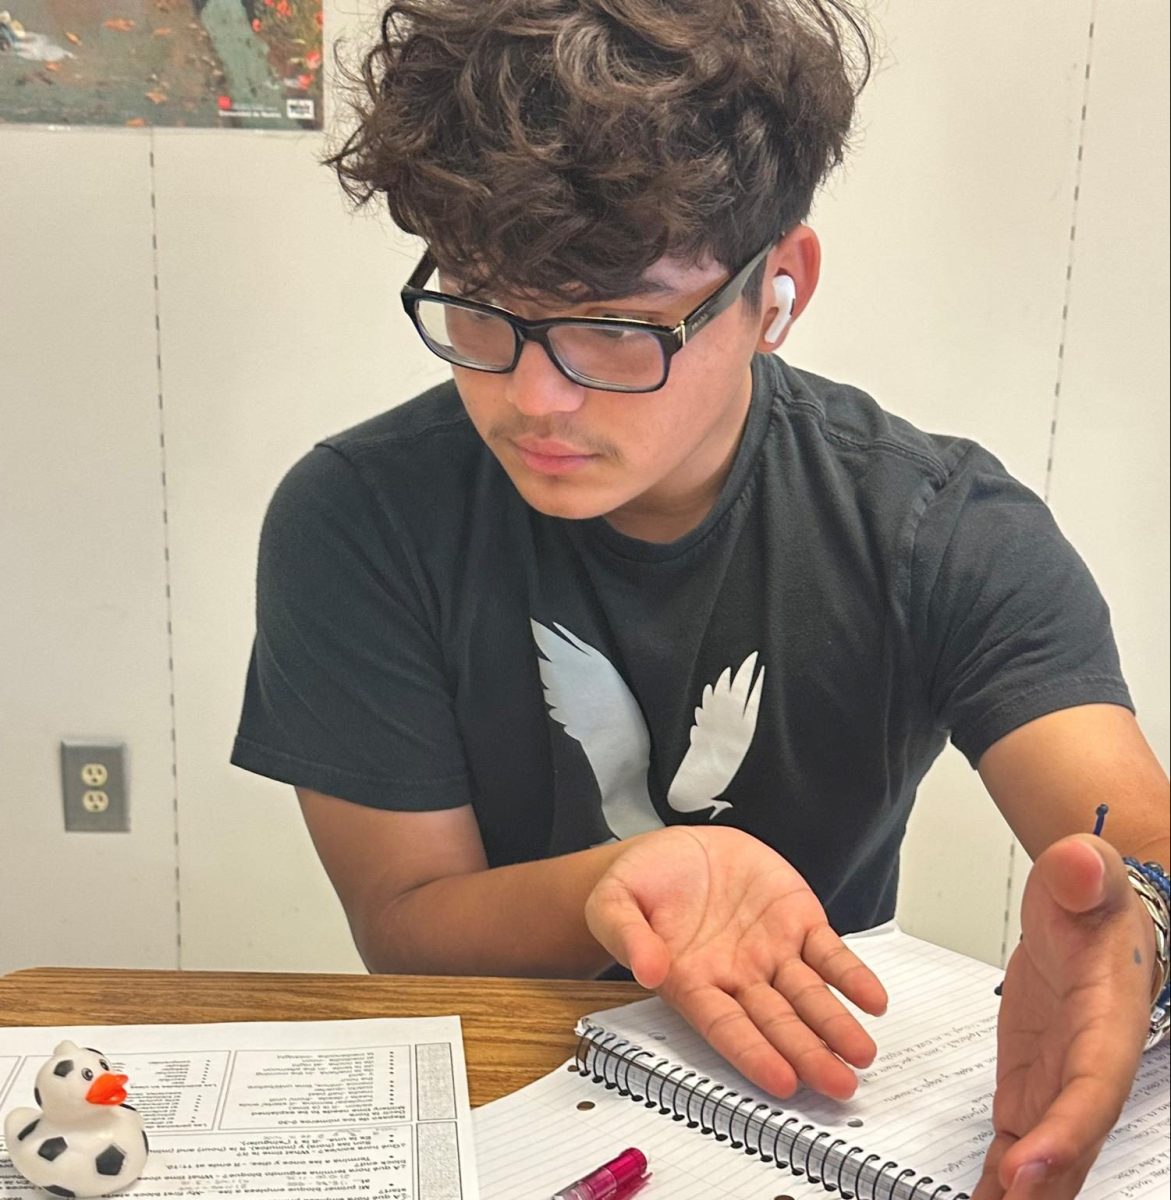 Sergio Molina (11) talks to his rubber duck Pessi about an assignment.